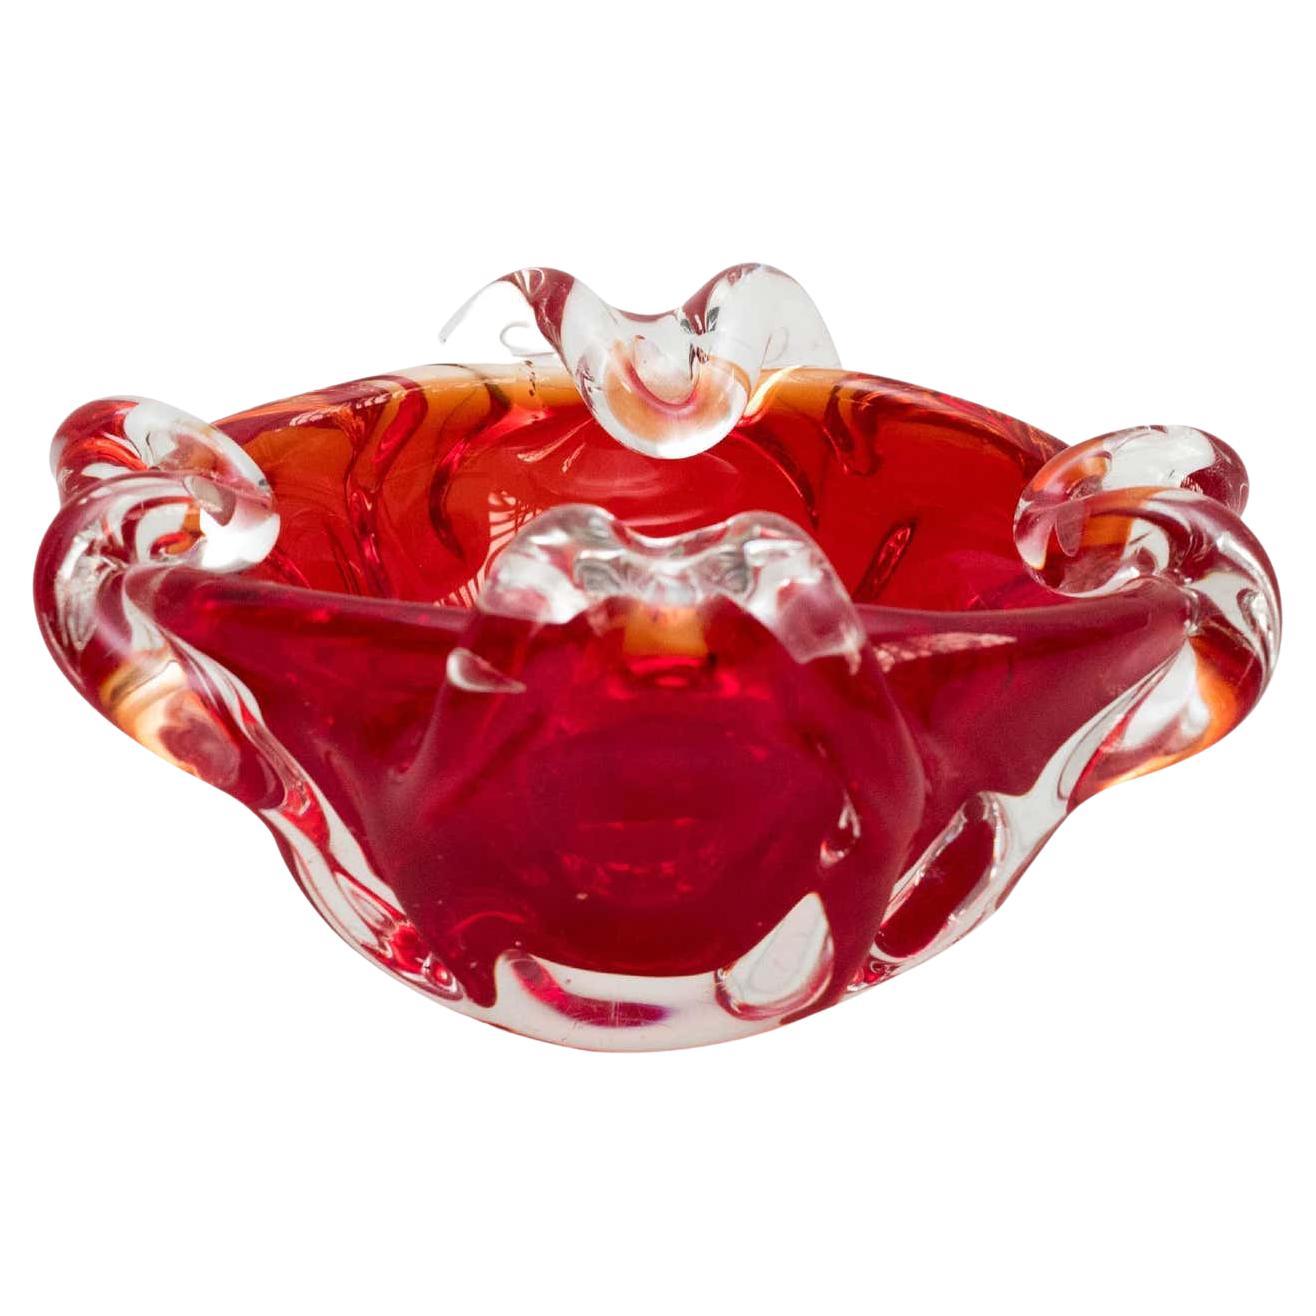 Red Murano Glass - 798 For Sale on 1stDibs